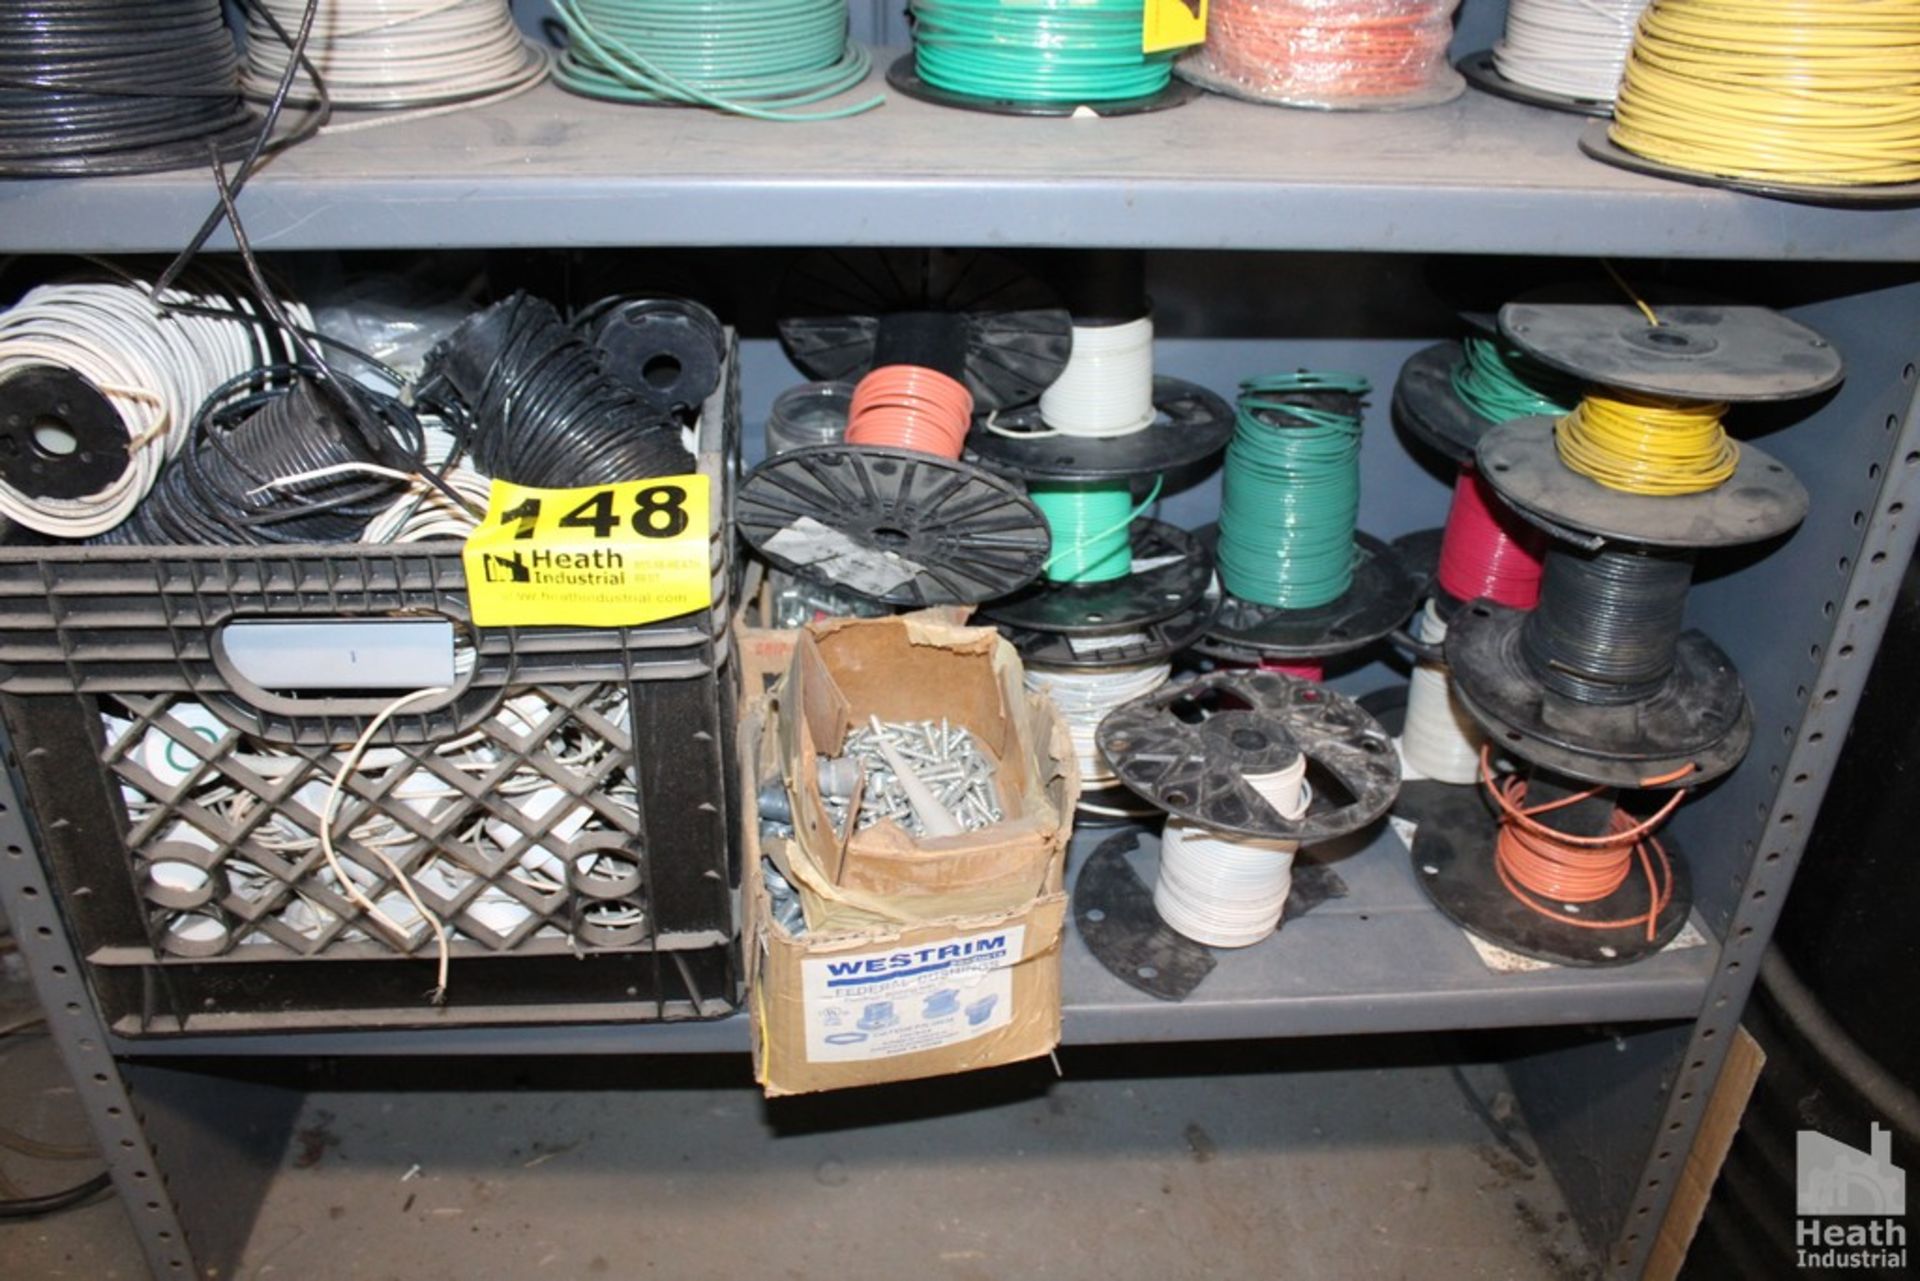 ELECTRICAL WIRE AND ELECTRICAL SUPPLIES ON TWO SHELVES